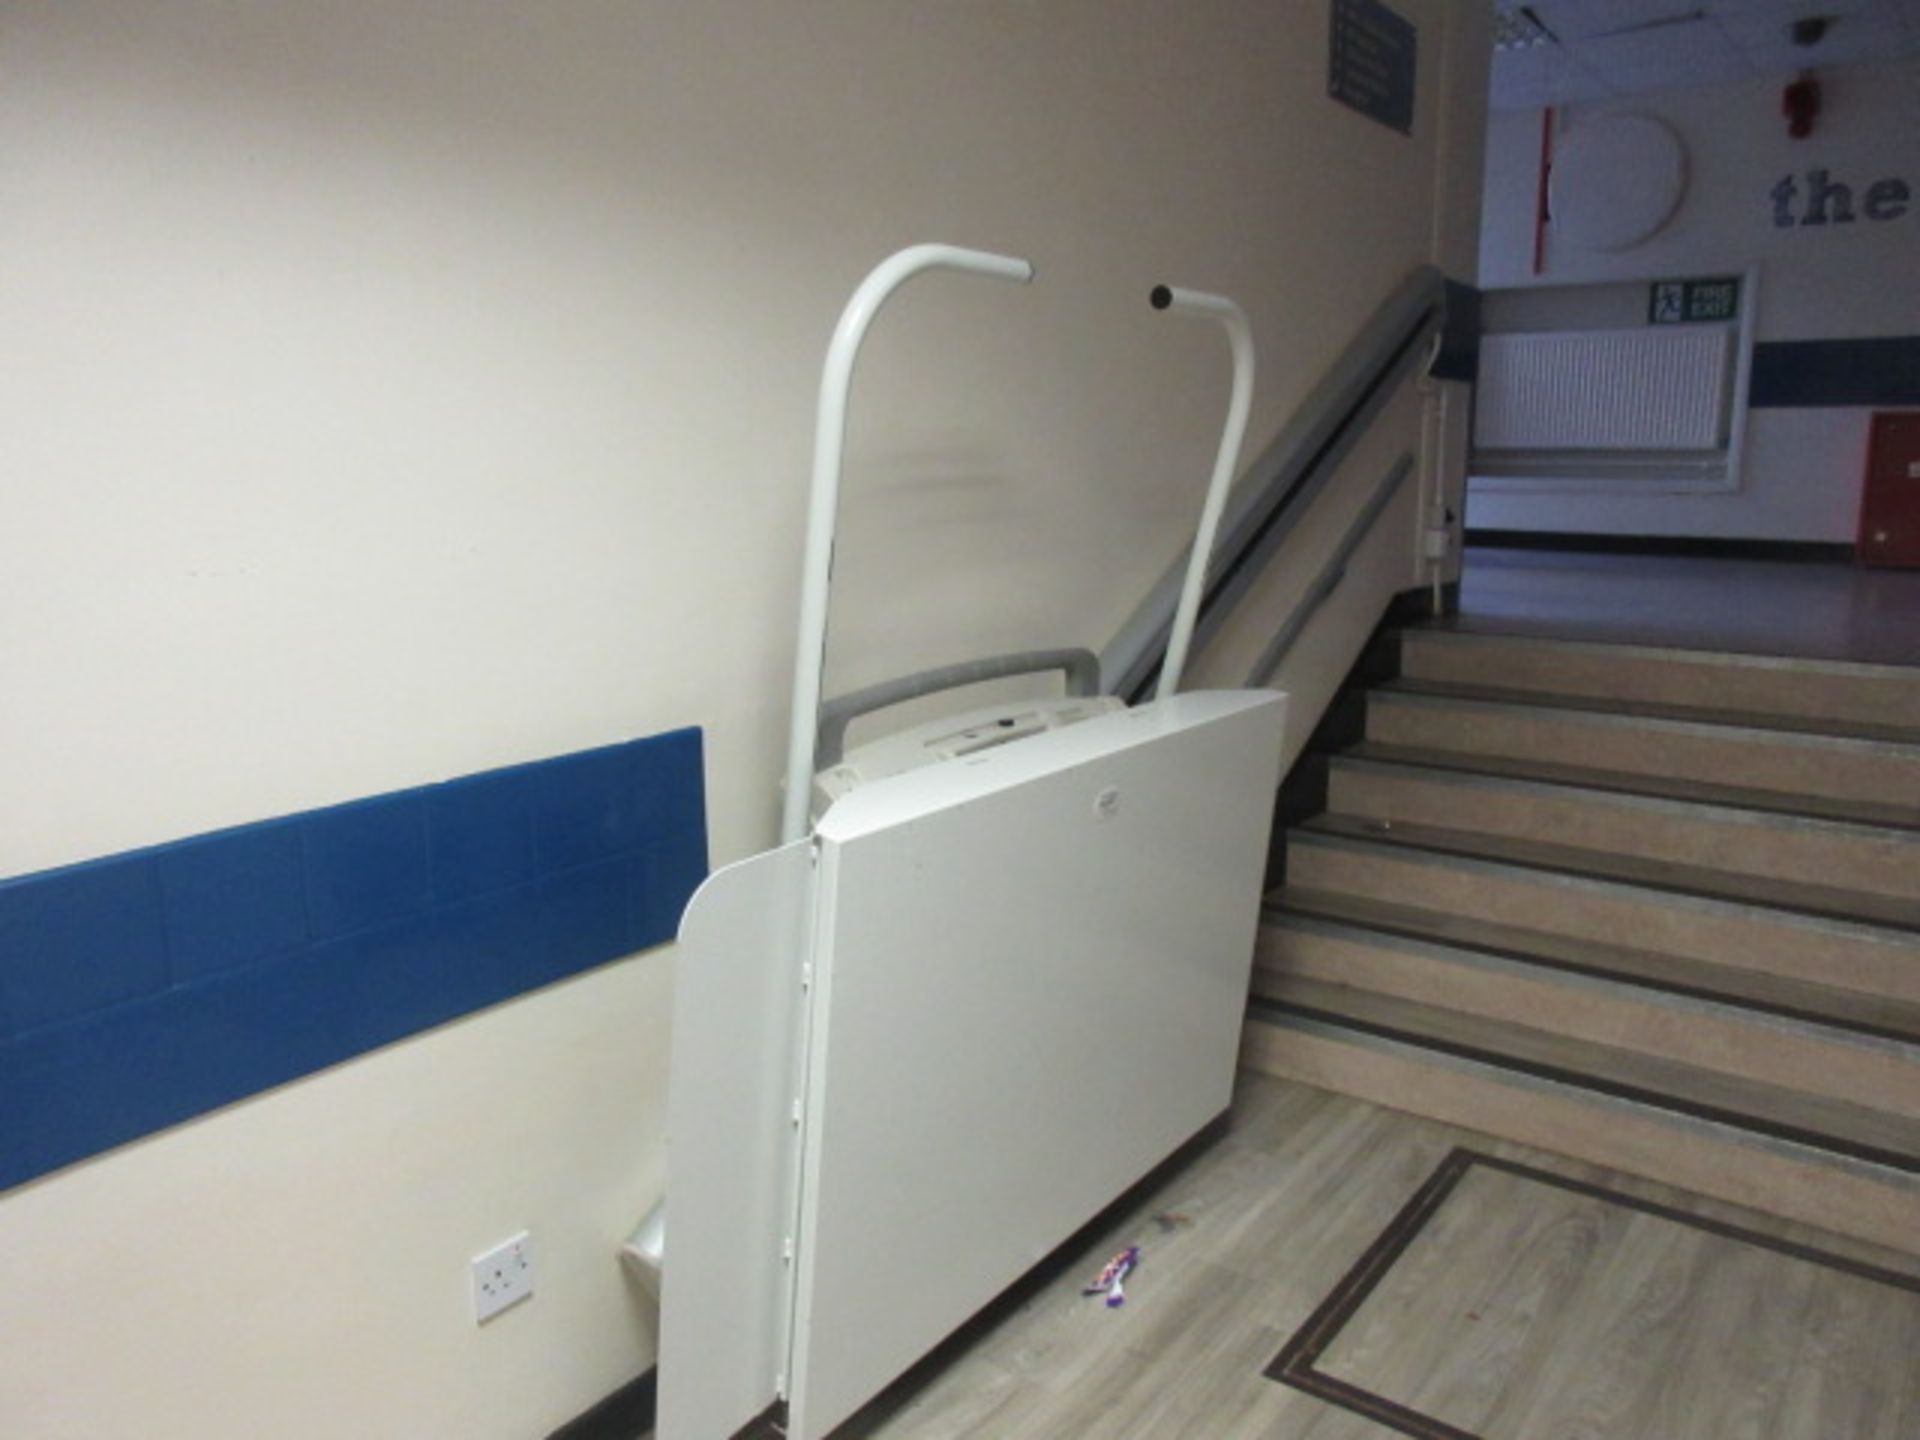 Stannah wheelchair Stair-Rise SX stair lift. Lift height 930mm, rated load 230kg (36 stone), size